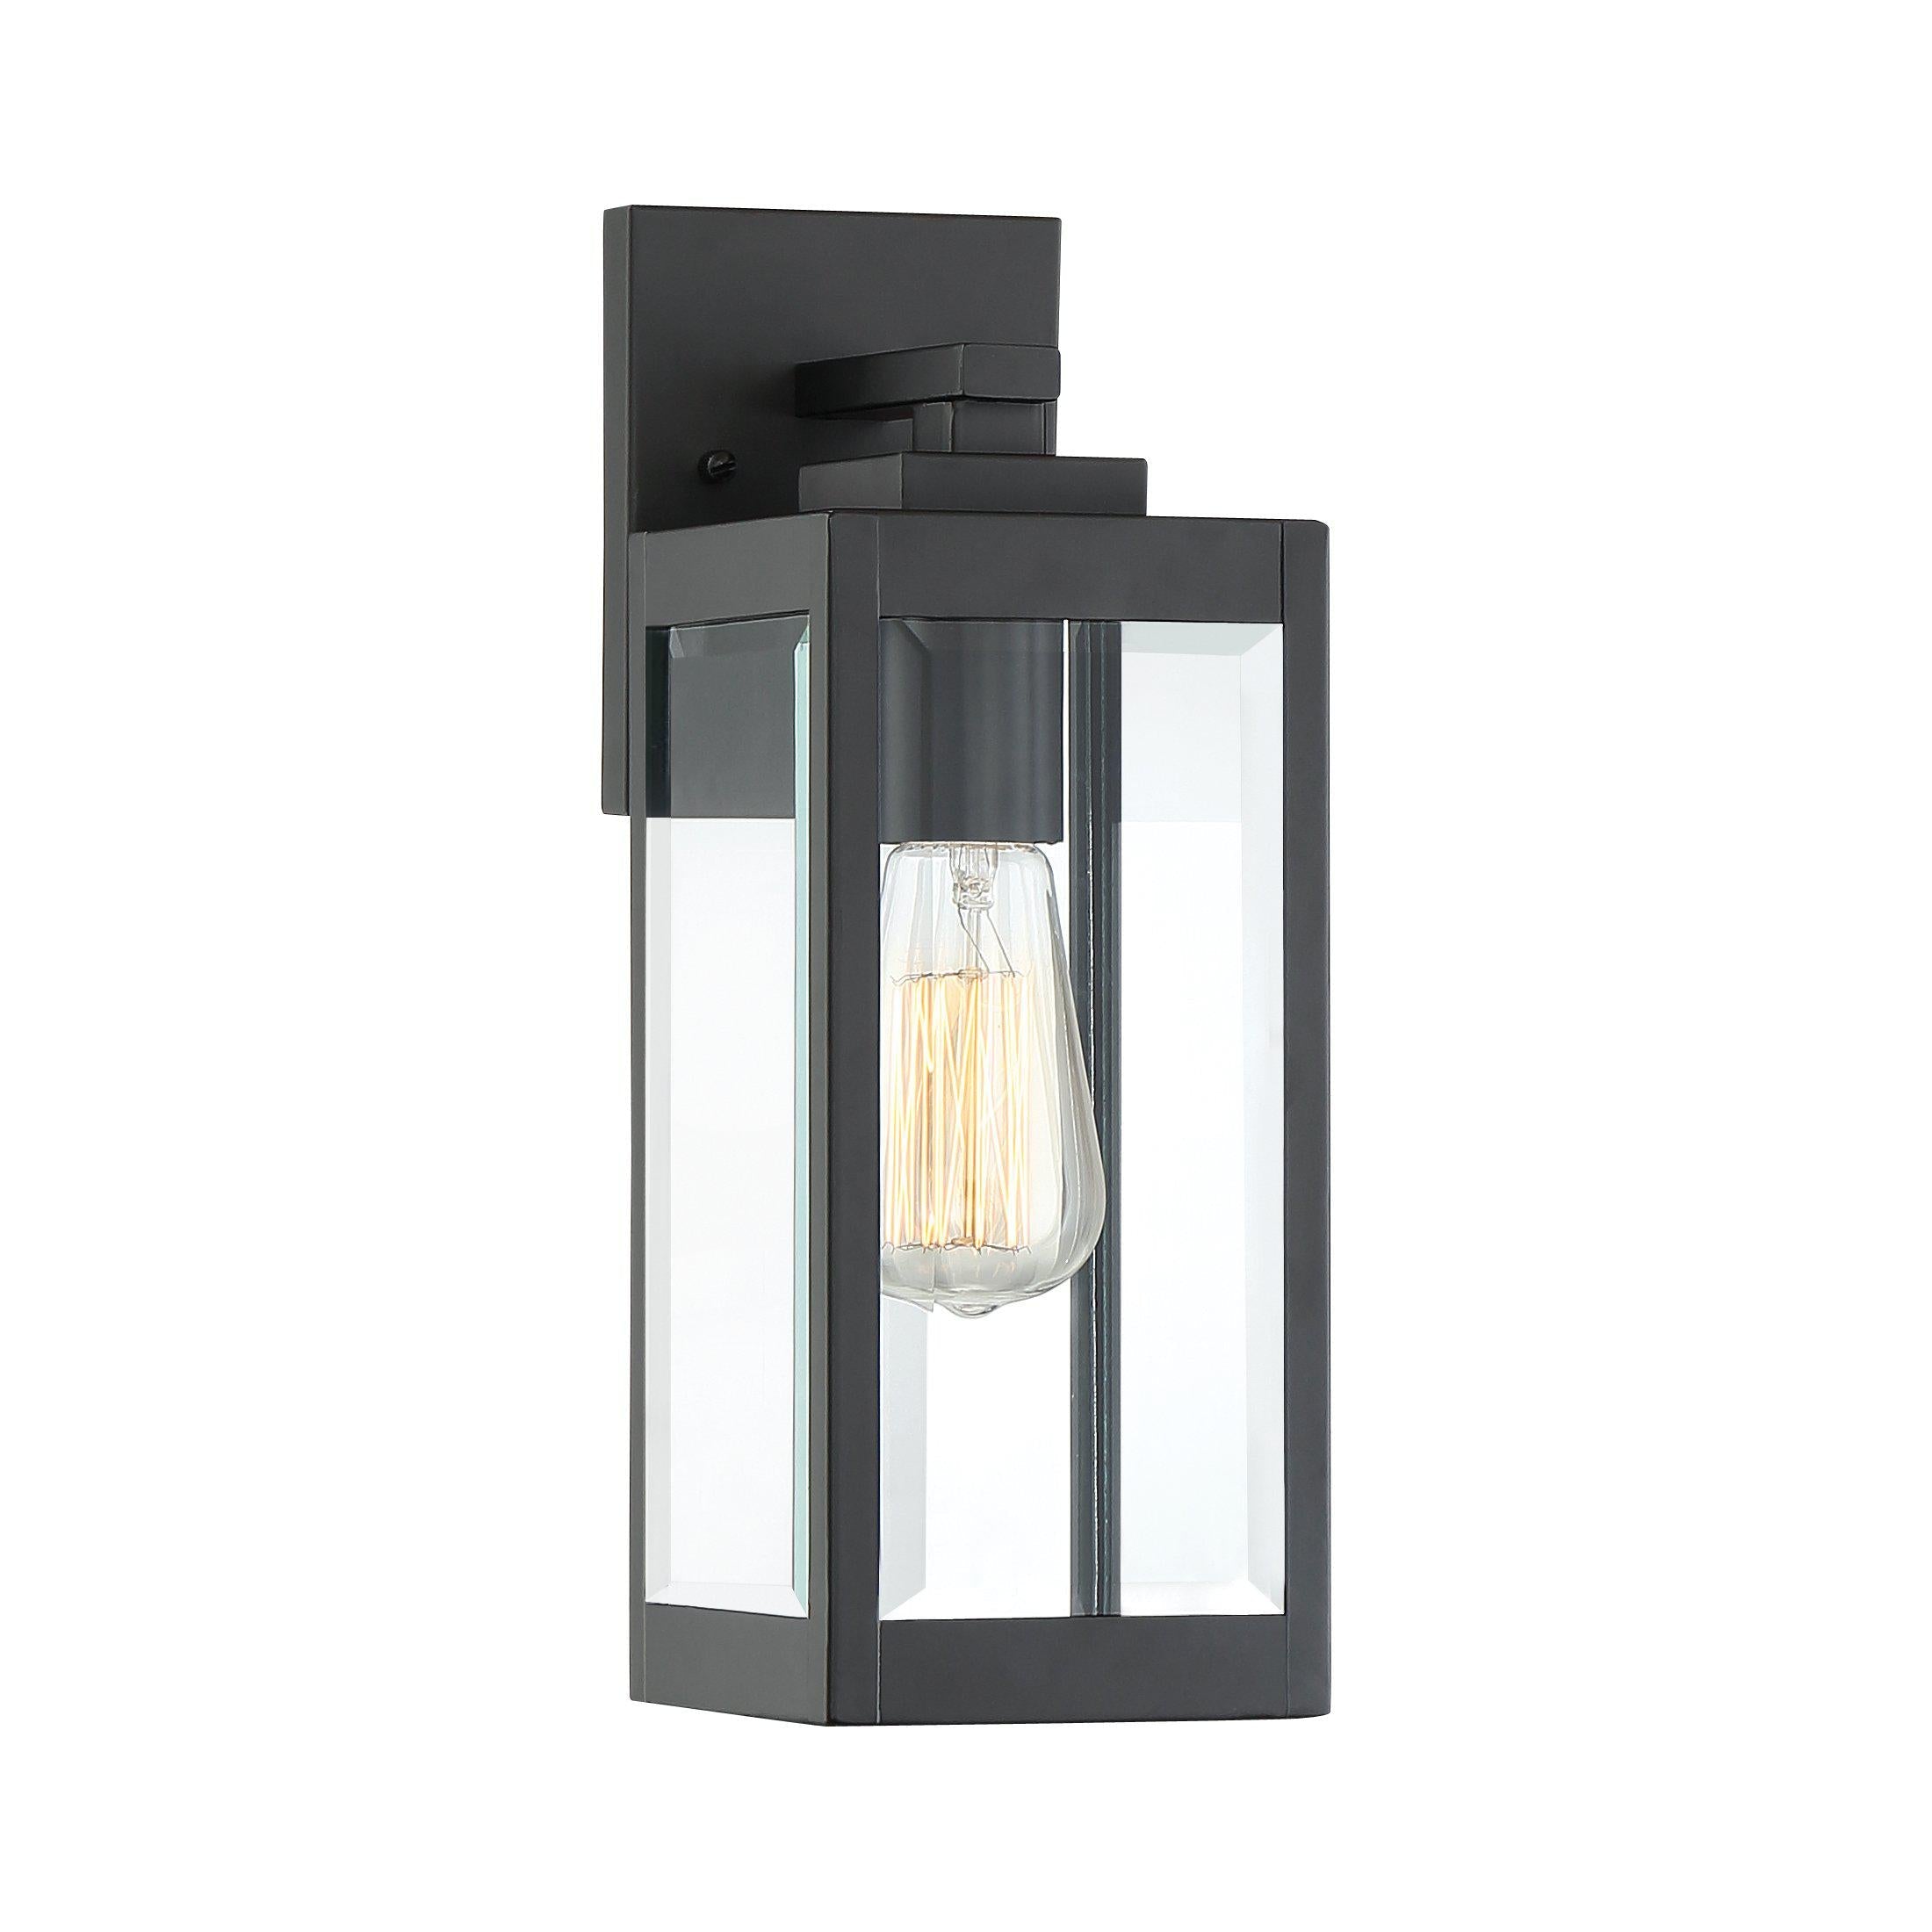 Quoizel Westover Outdoor Lantern, Small WVR8405 | Overstock